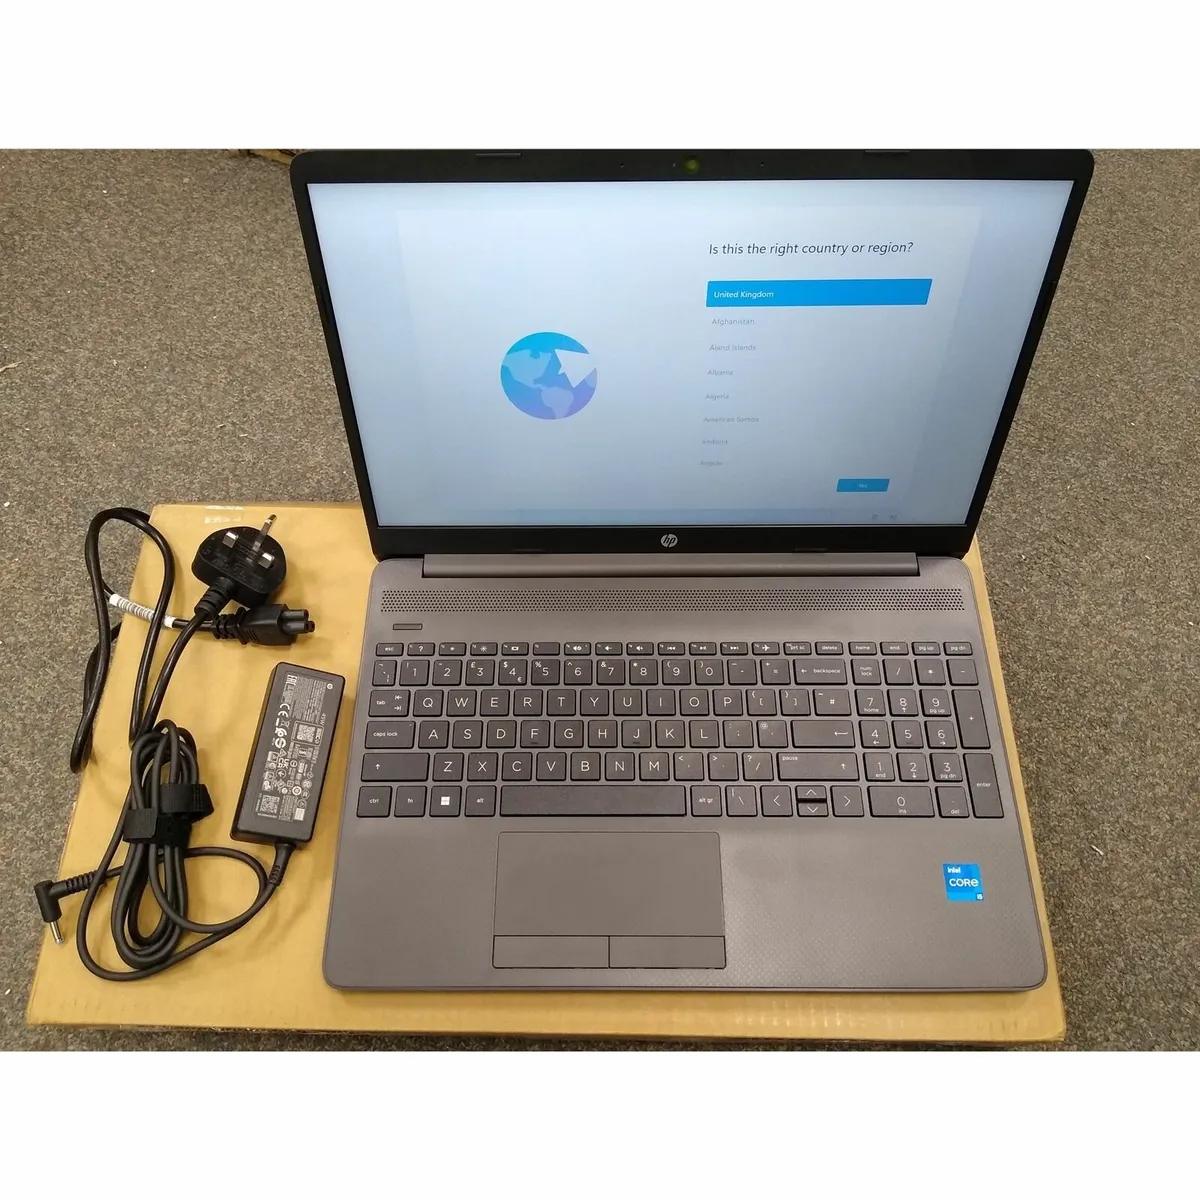 HP 250 G9 Laptop. Comes with free gift.